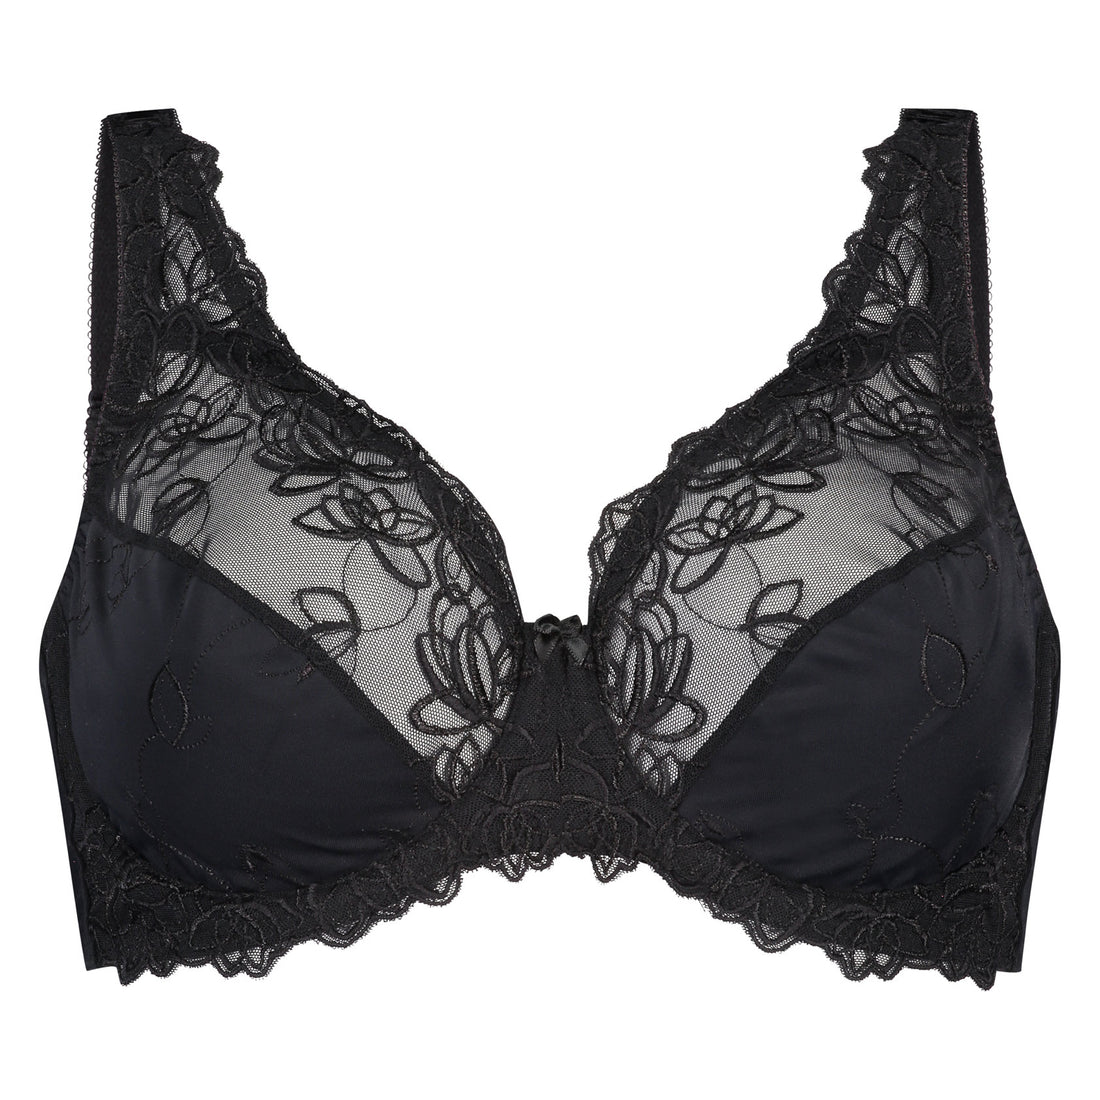 Bra With Lace Cups In Different Cup Sizes_102513_Black_01